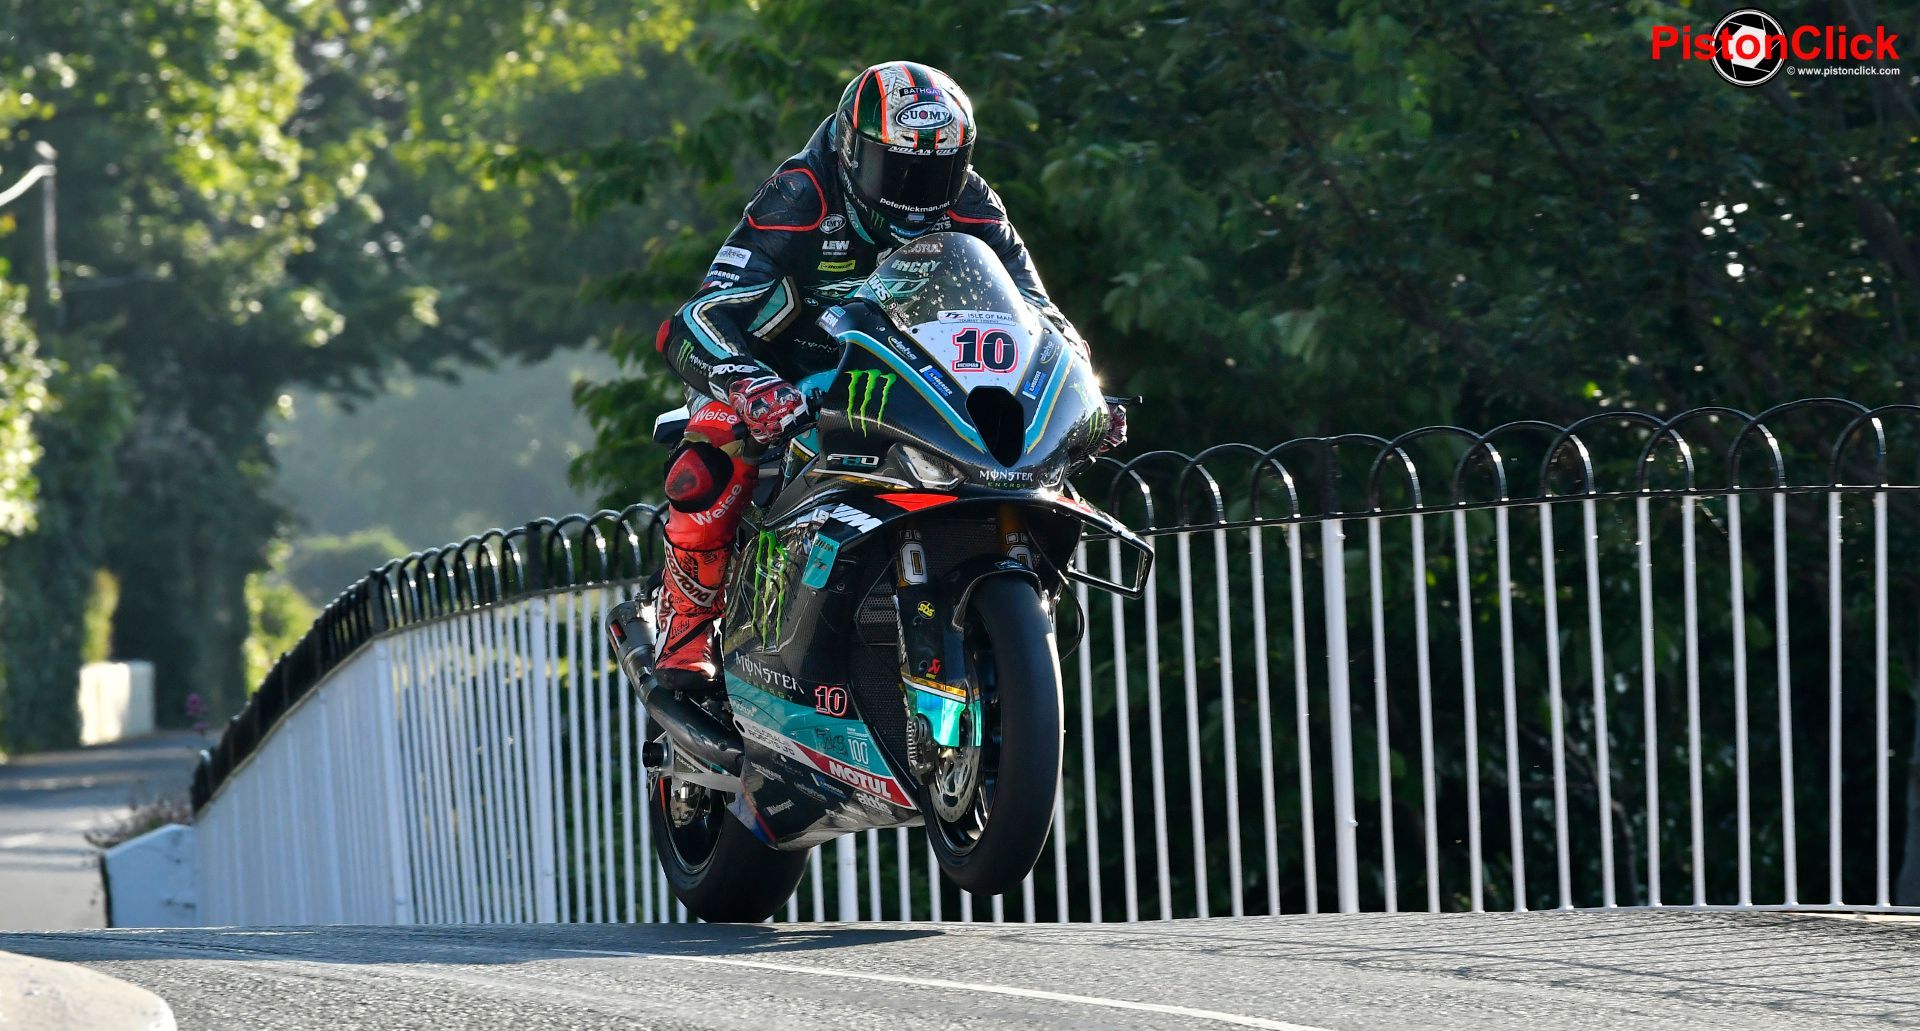 Isle of Man TT, reports, guides, accommodation, viewing points, riders, locations,